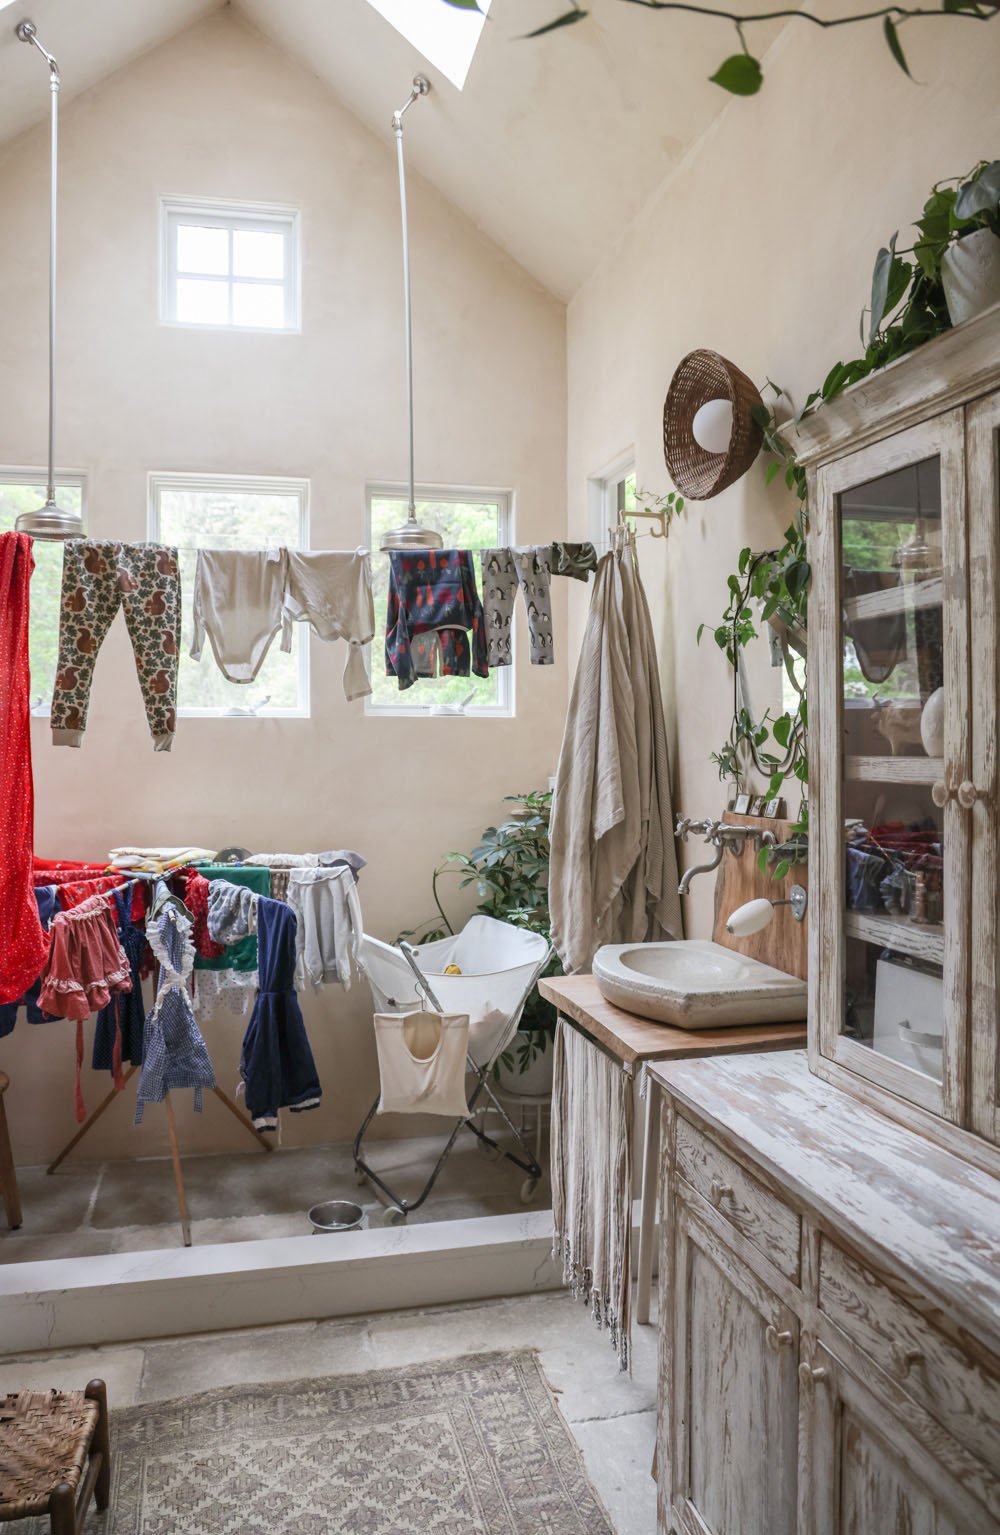 Small Space Laundry Zone Solution for Air Drying Linens — The Tiny